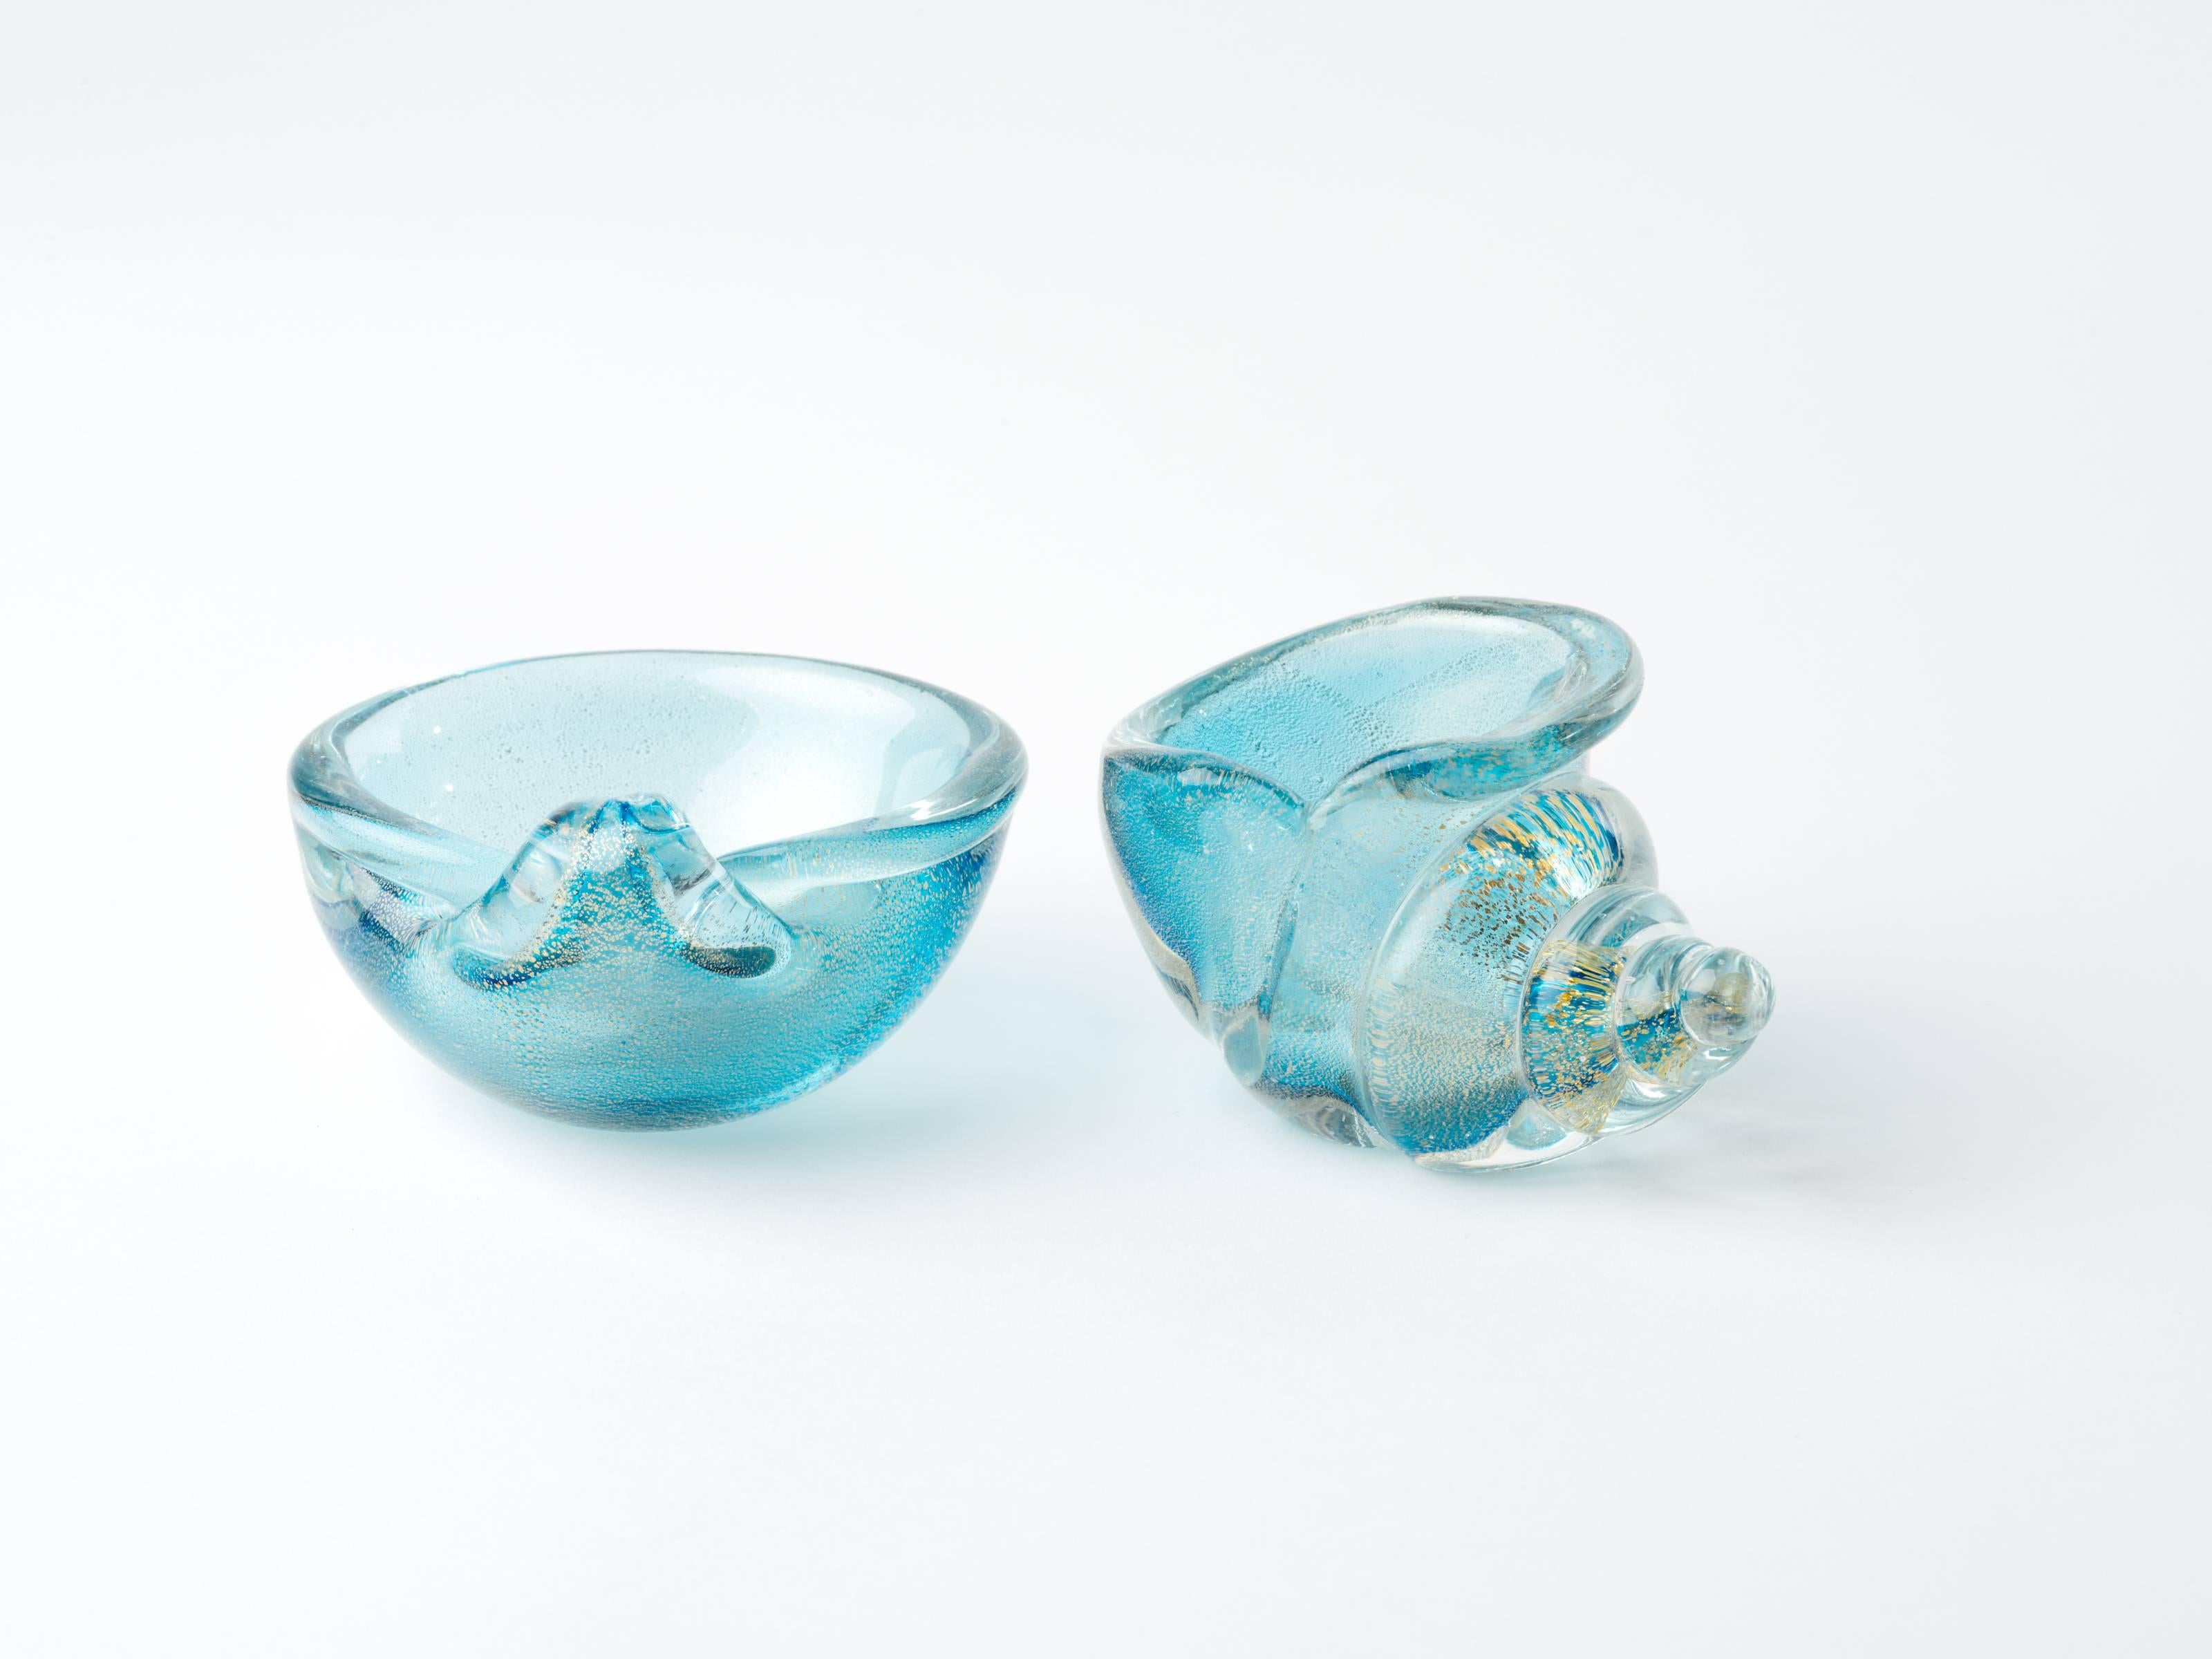 Pair of Mid-Century Modern Murano glass bowls in hues of aqua with 24-karatgold leaf flecks. Bowls have elegant shell forms with scrolled rims. Decorative or can be used a salt cellars.